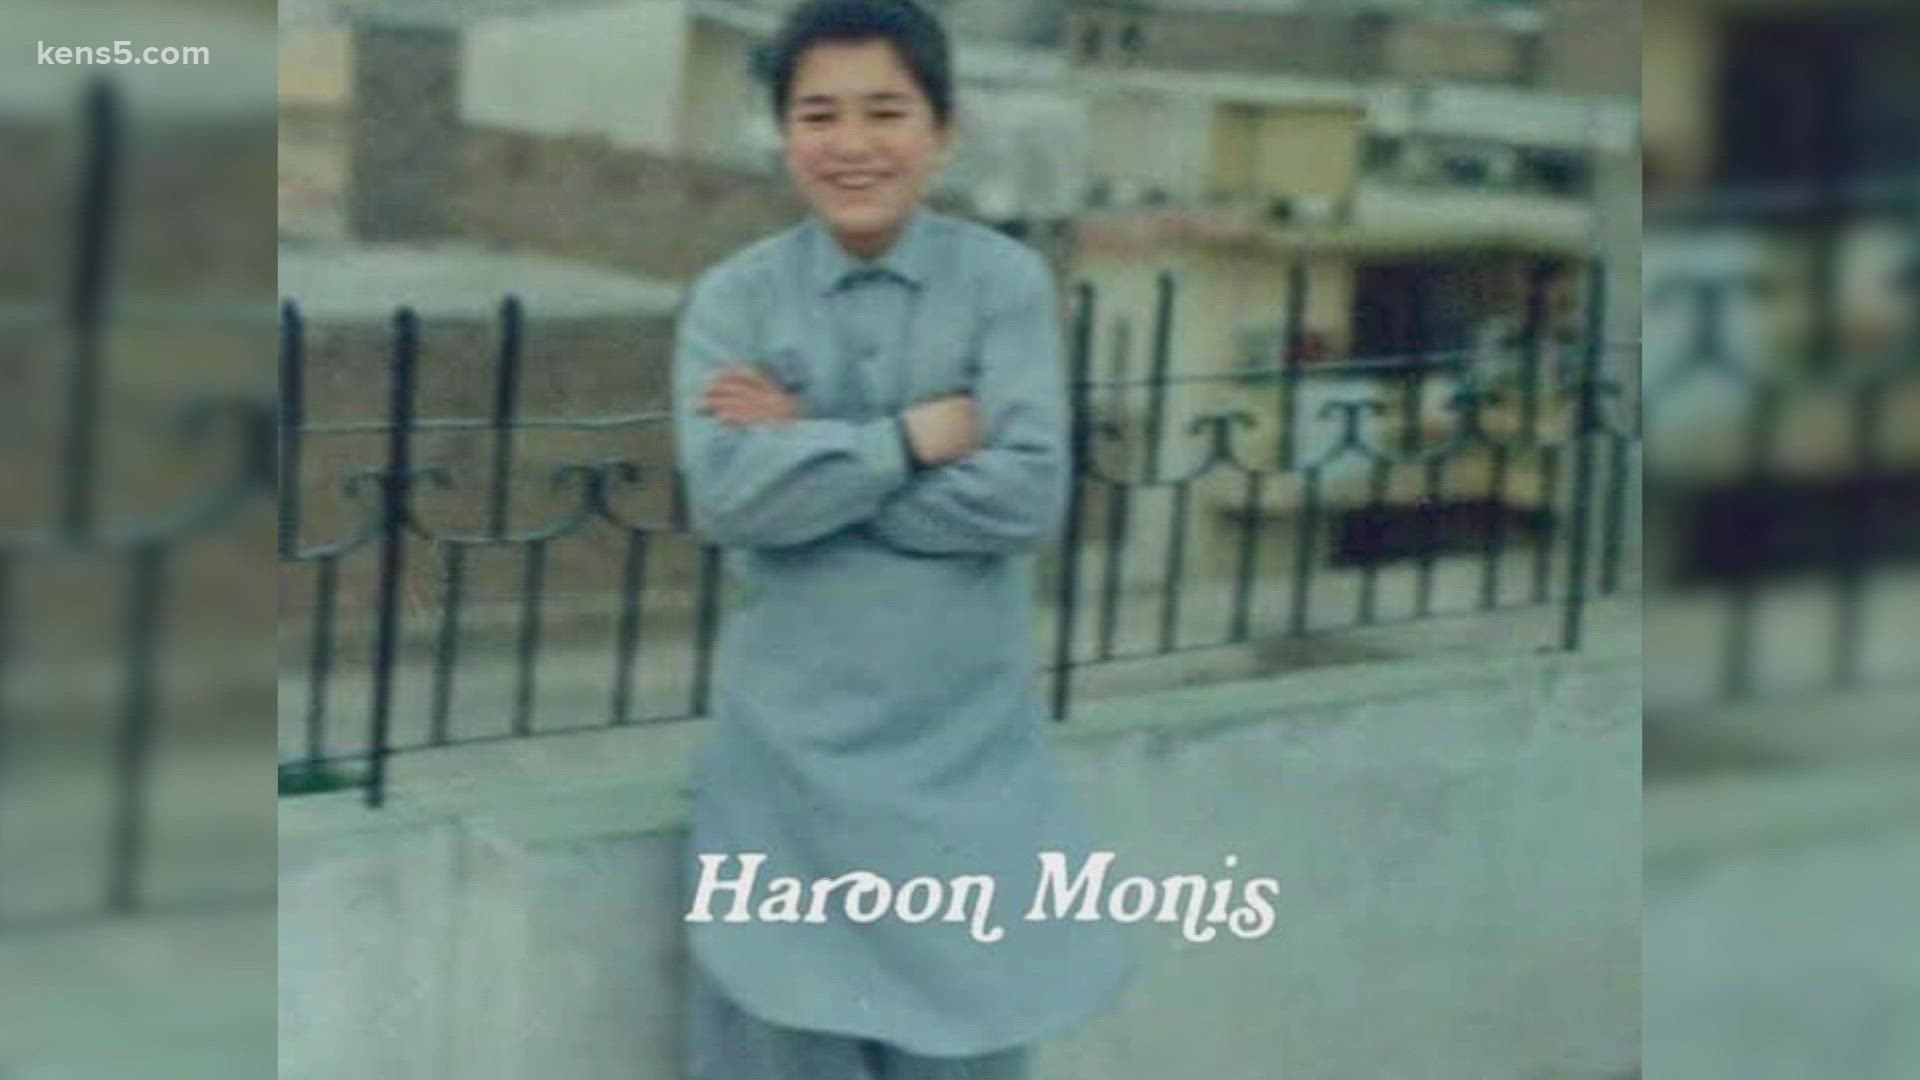 Haroon Monis fears for the lives of thousands of Afghan citizens; many of whom haven't grown up in a nation ruled by the Taliban.